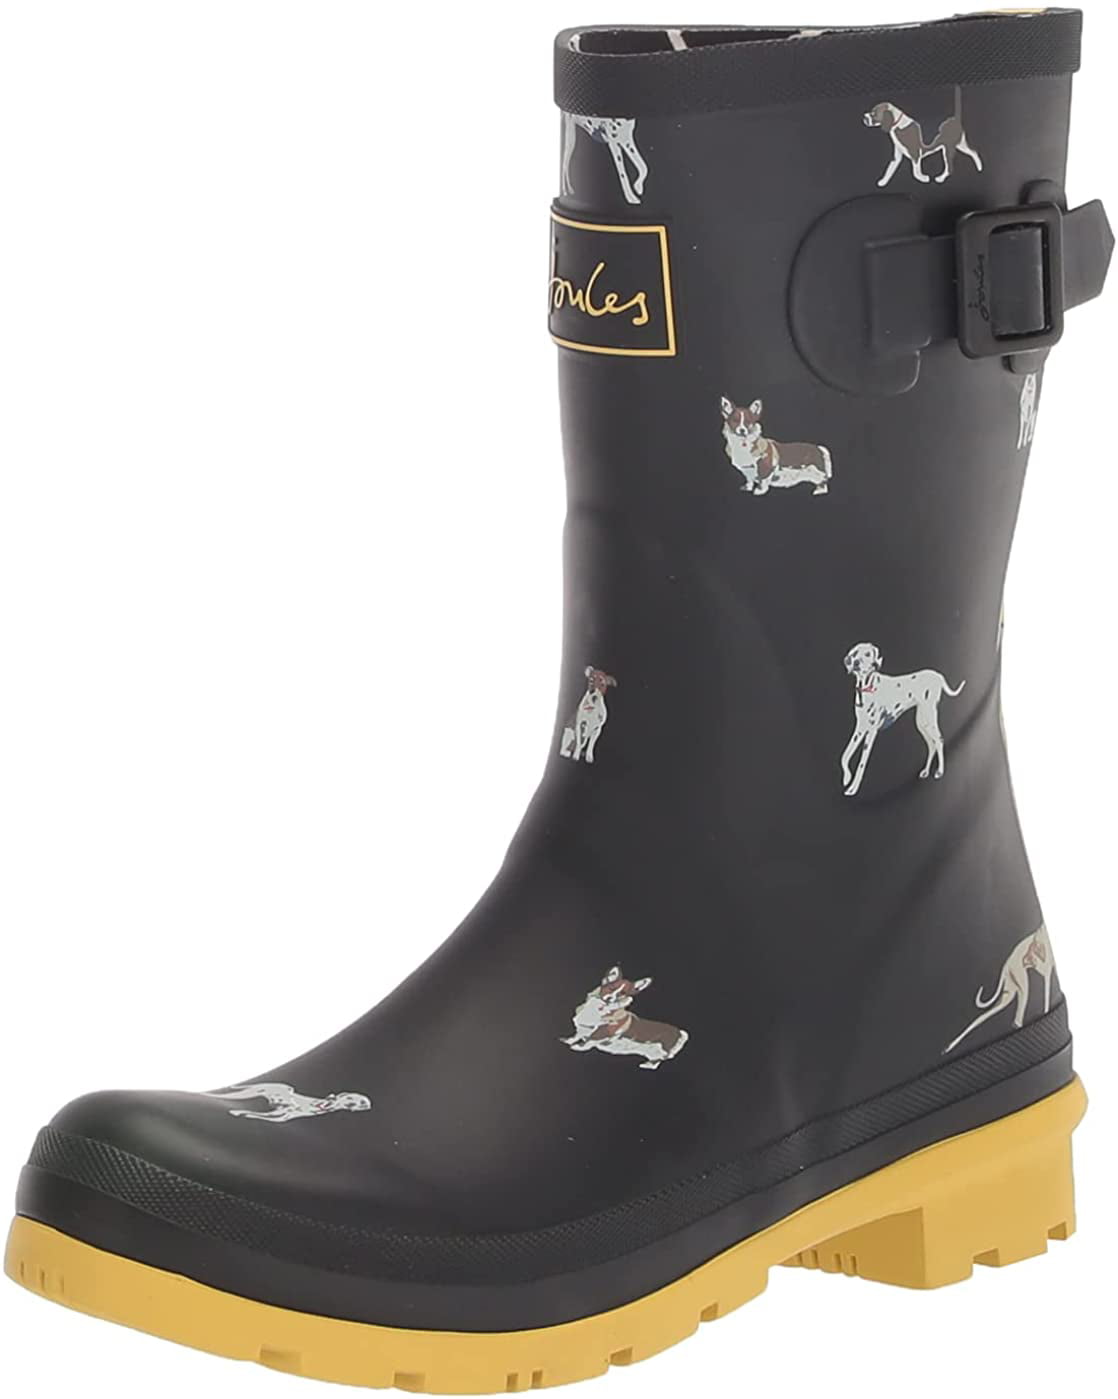 Joules Womens Molly Welly Rain Boot